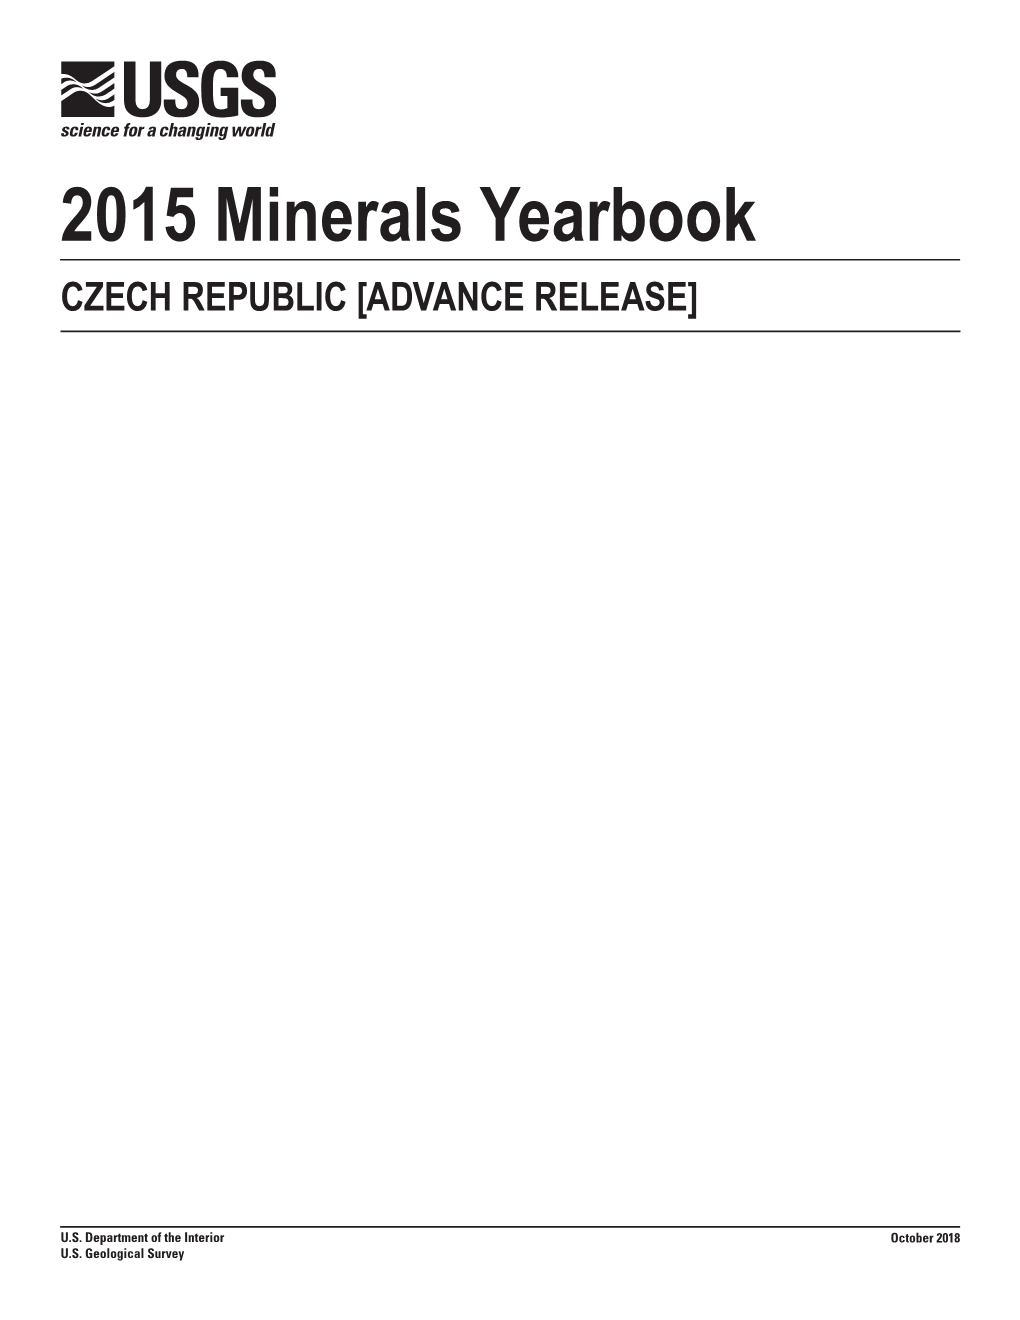 The Mineral Industry of Czech Republic in 2015